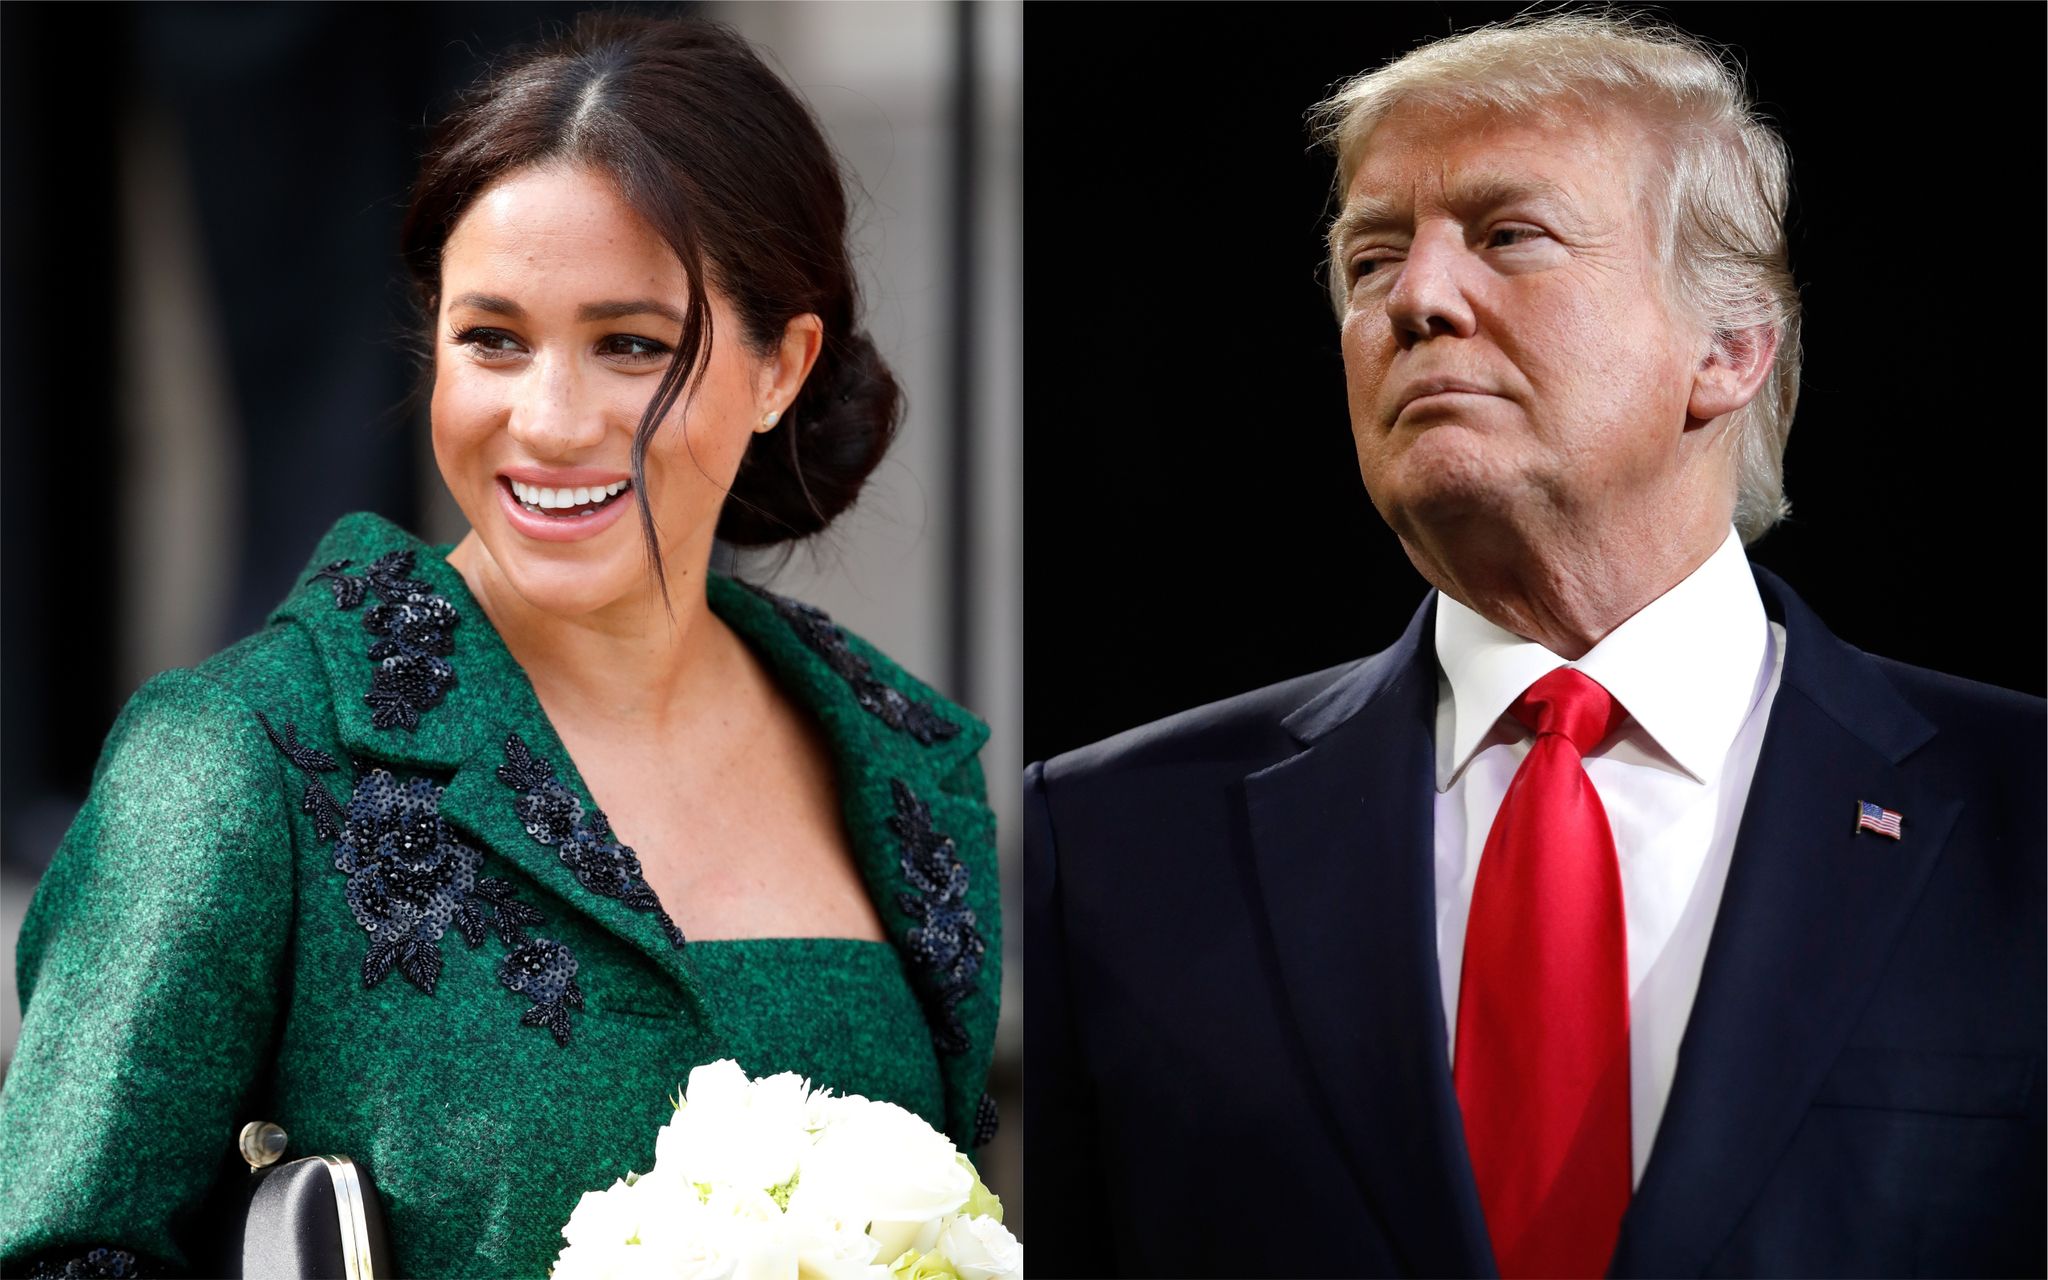 The Duchess of Sussex and Donald Trump